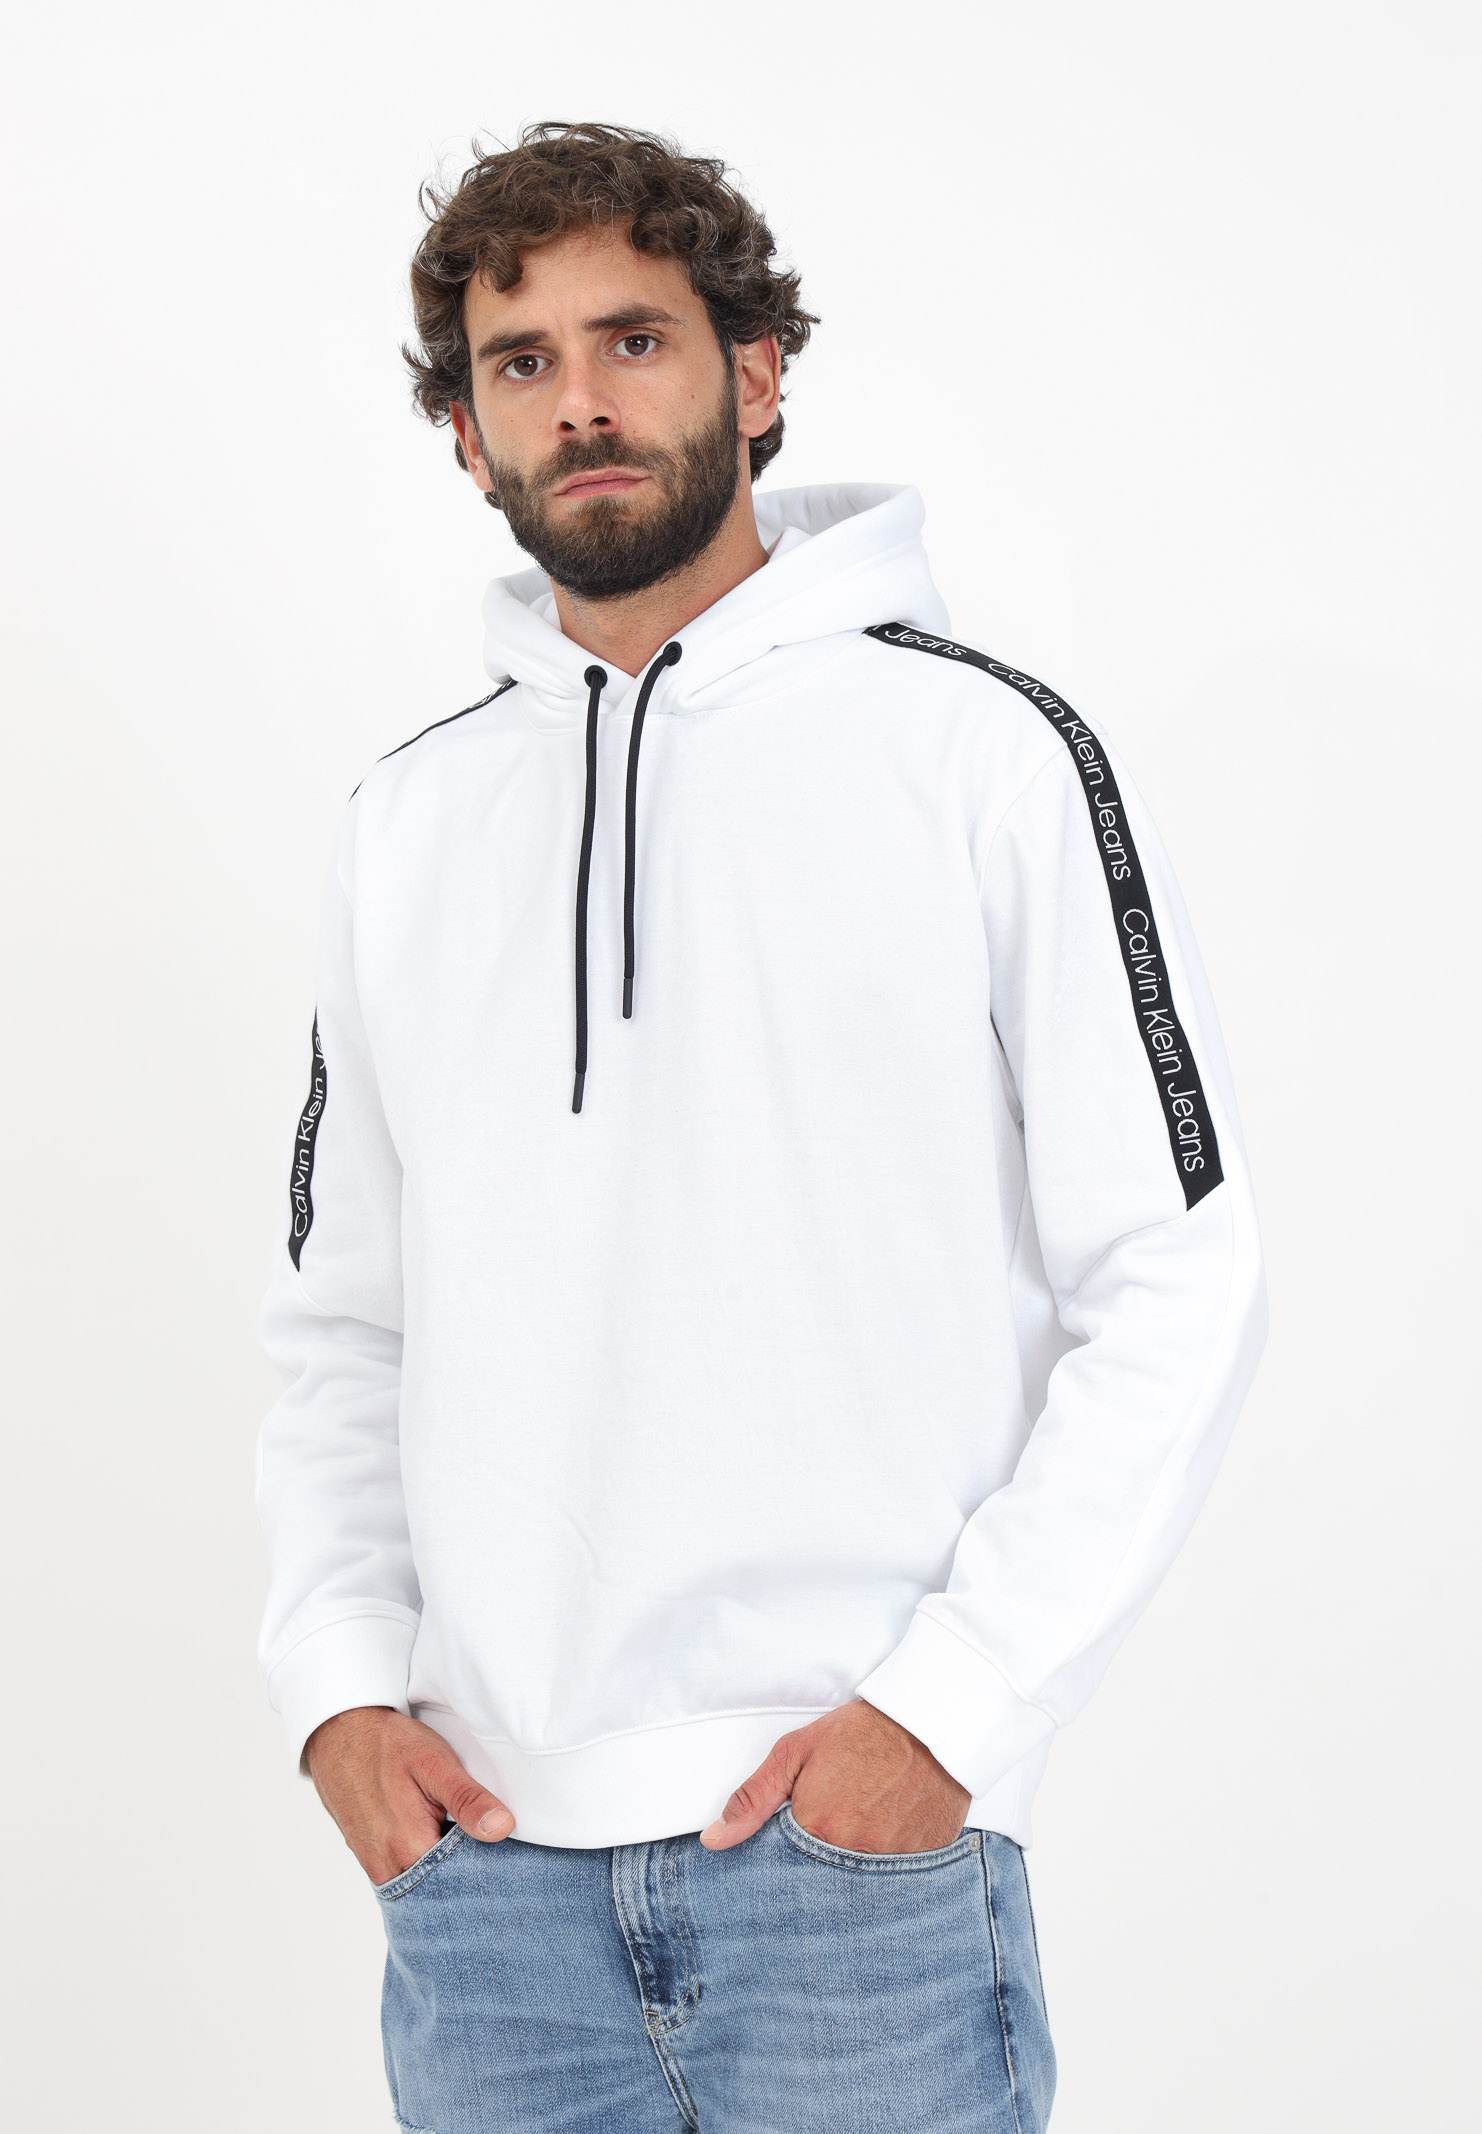 White men's sweatshirt with hood and logo tape along the shoulders CALVIN KLEIN JEANS | J30J323429YAFYAF